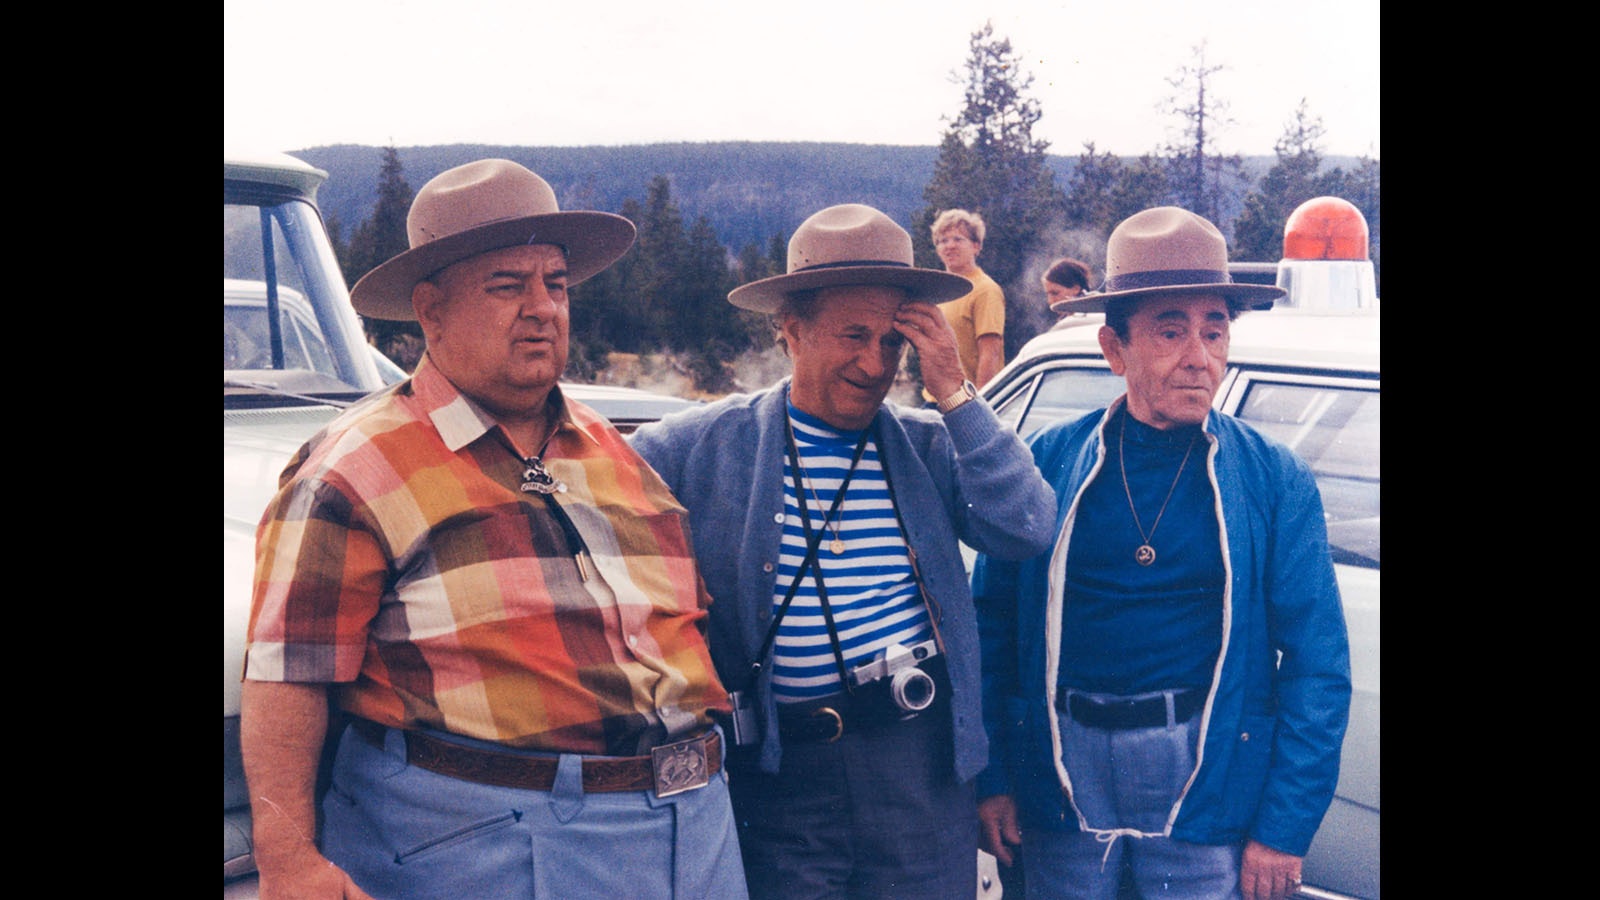 The Three Stooges at Yellowstone National Park in 1969.